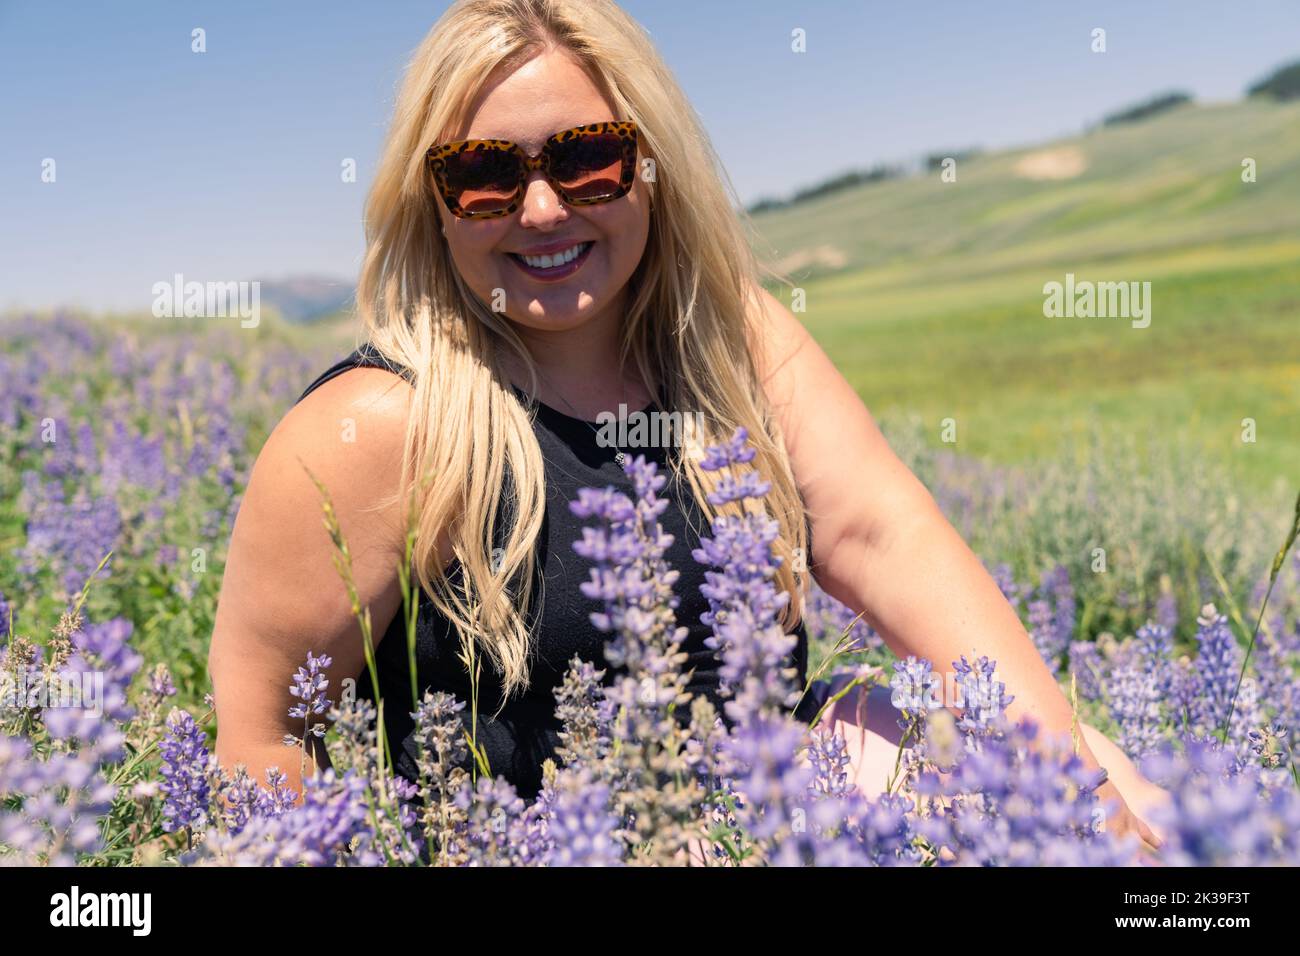 Pretty blonde woman sits in a field of lupine wildflowers, posing with sunglasses and smiling Stock Photo